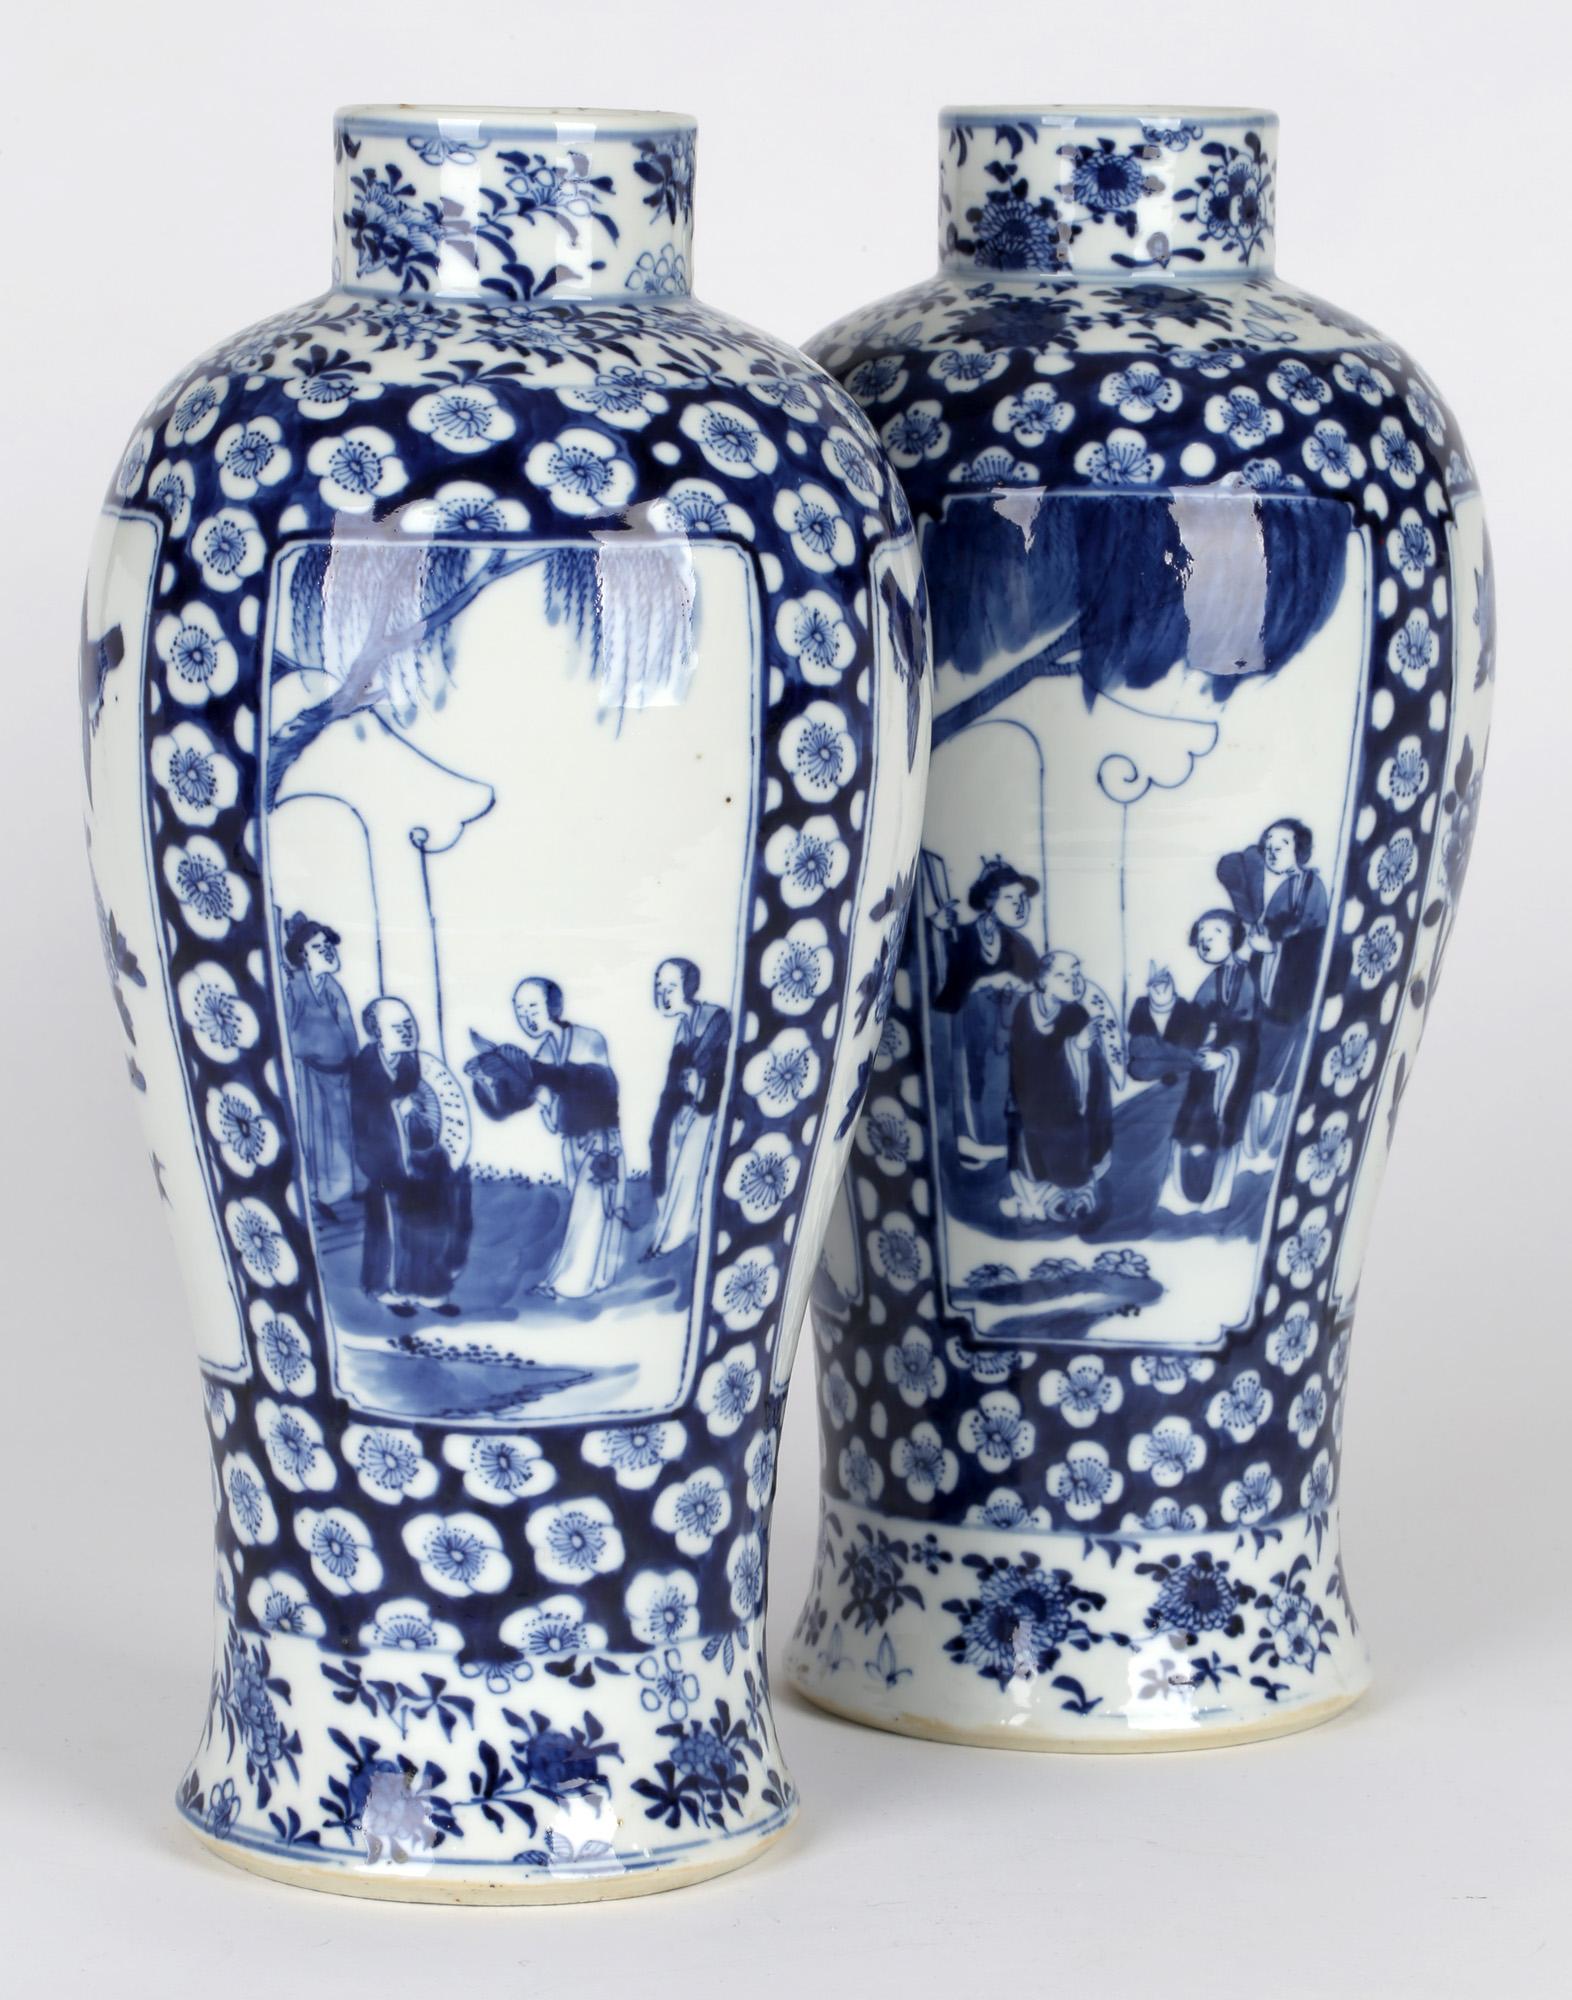 An impressive and large pair Chinese Qing Kangxi mark blue and white vases painted with panels with birds and figures and dating from the 19th century. These tall bulbous shaped porcelain vases stand on a rounded unglazed foot with recessed bases